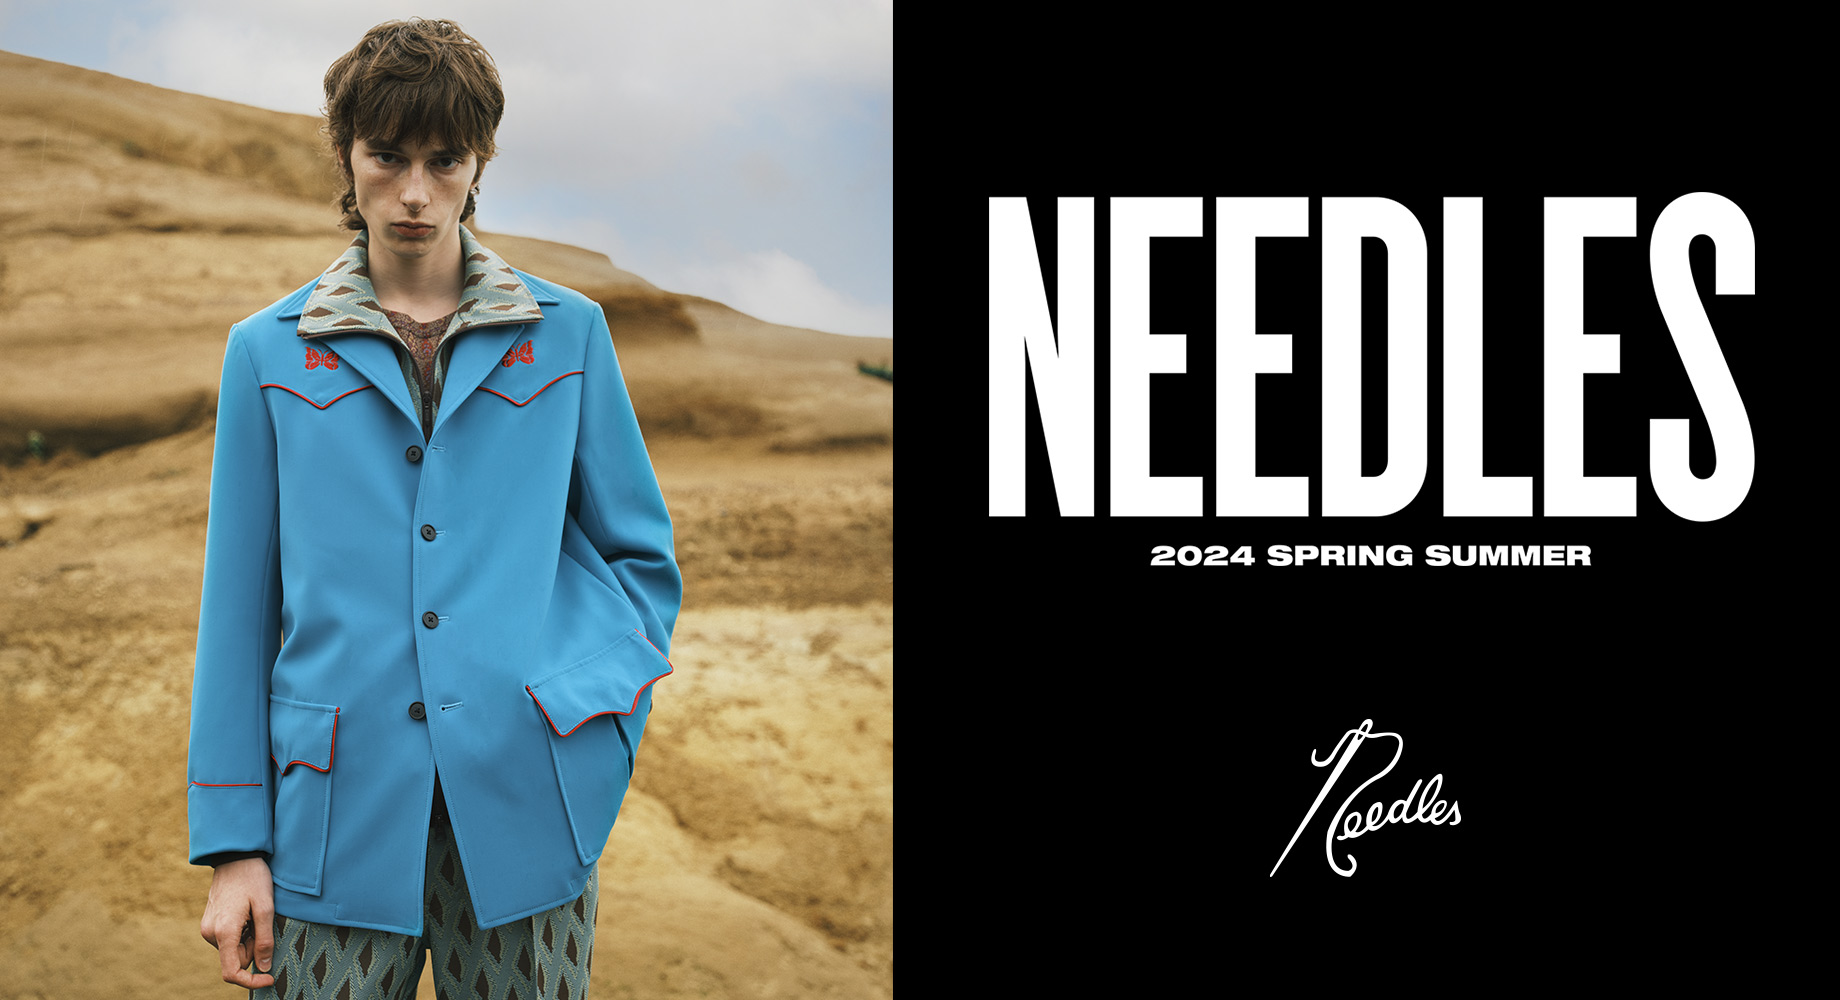 〈NEEDLES〉2024 SPRING SUMMER COLLECTION